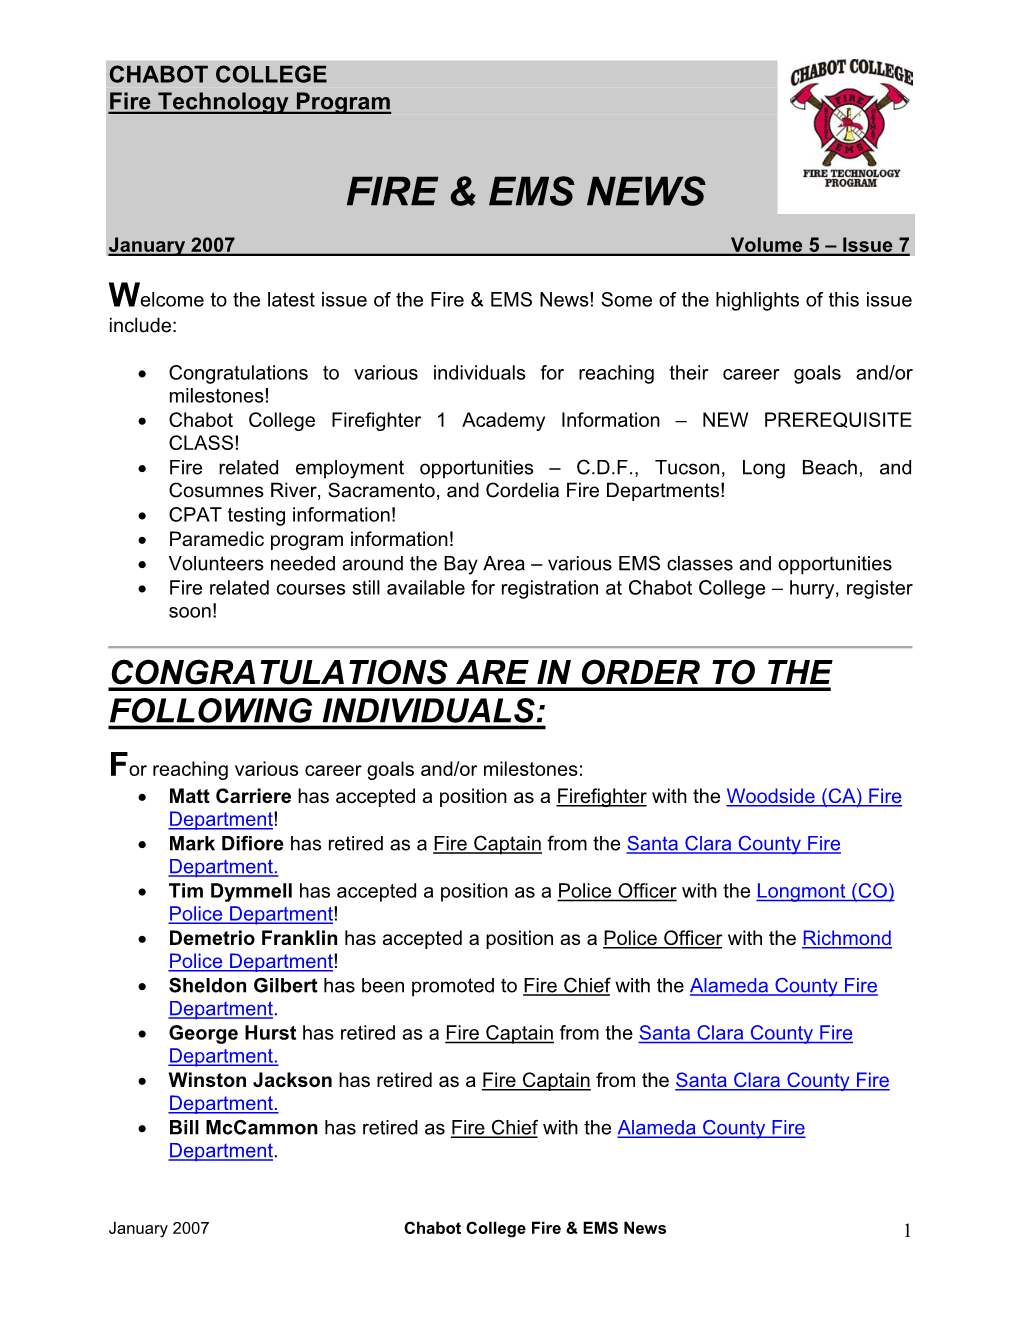 Download the Latest Version of the California State Fire Training Newsletter to Find out What Is Going on with YOUR Fire Service Training in the State of California